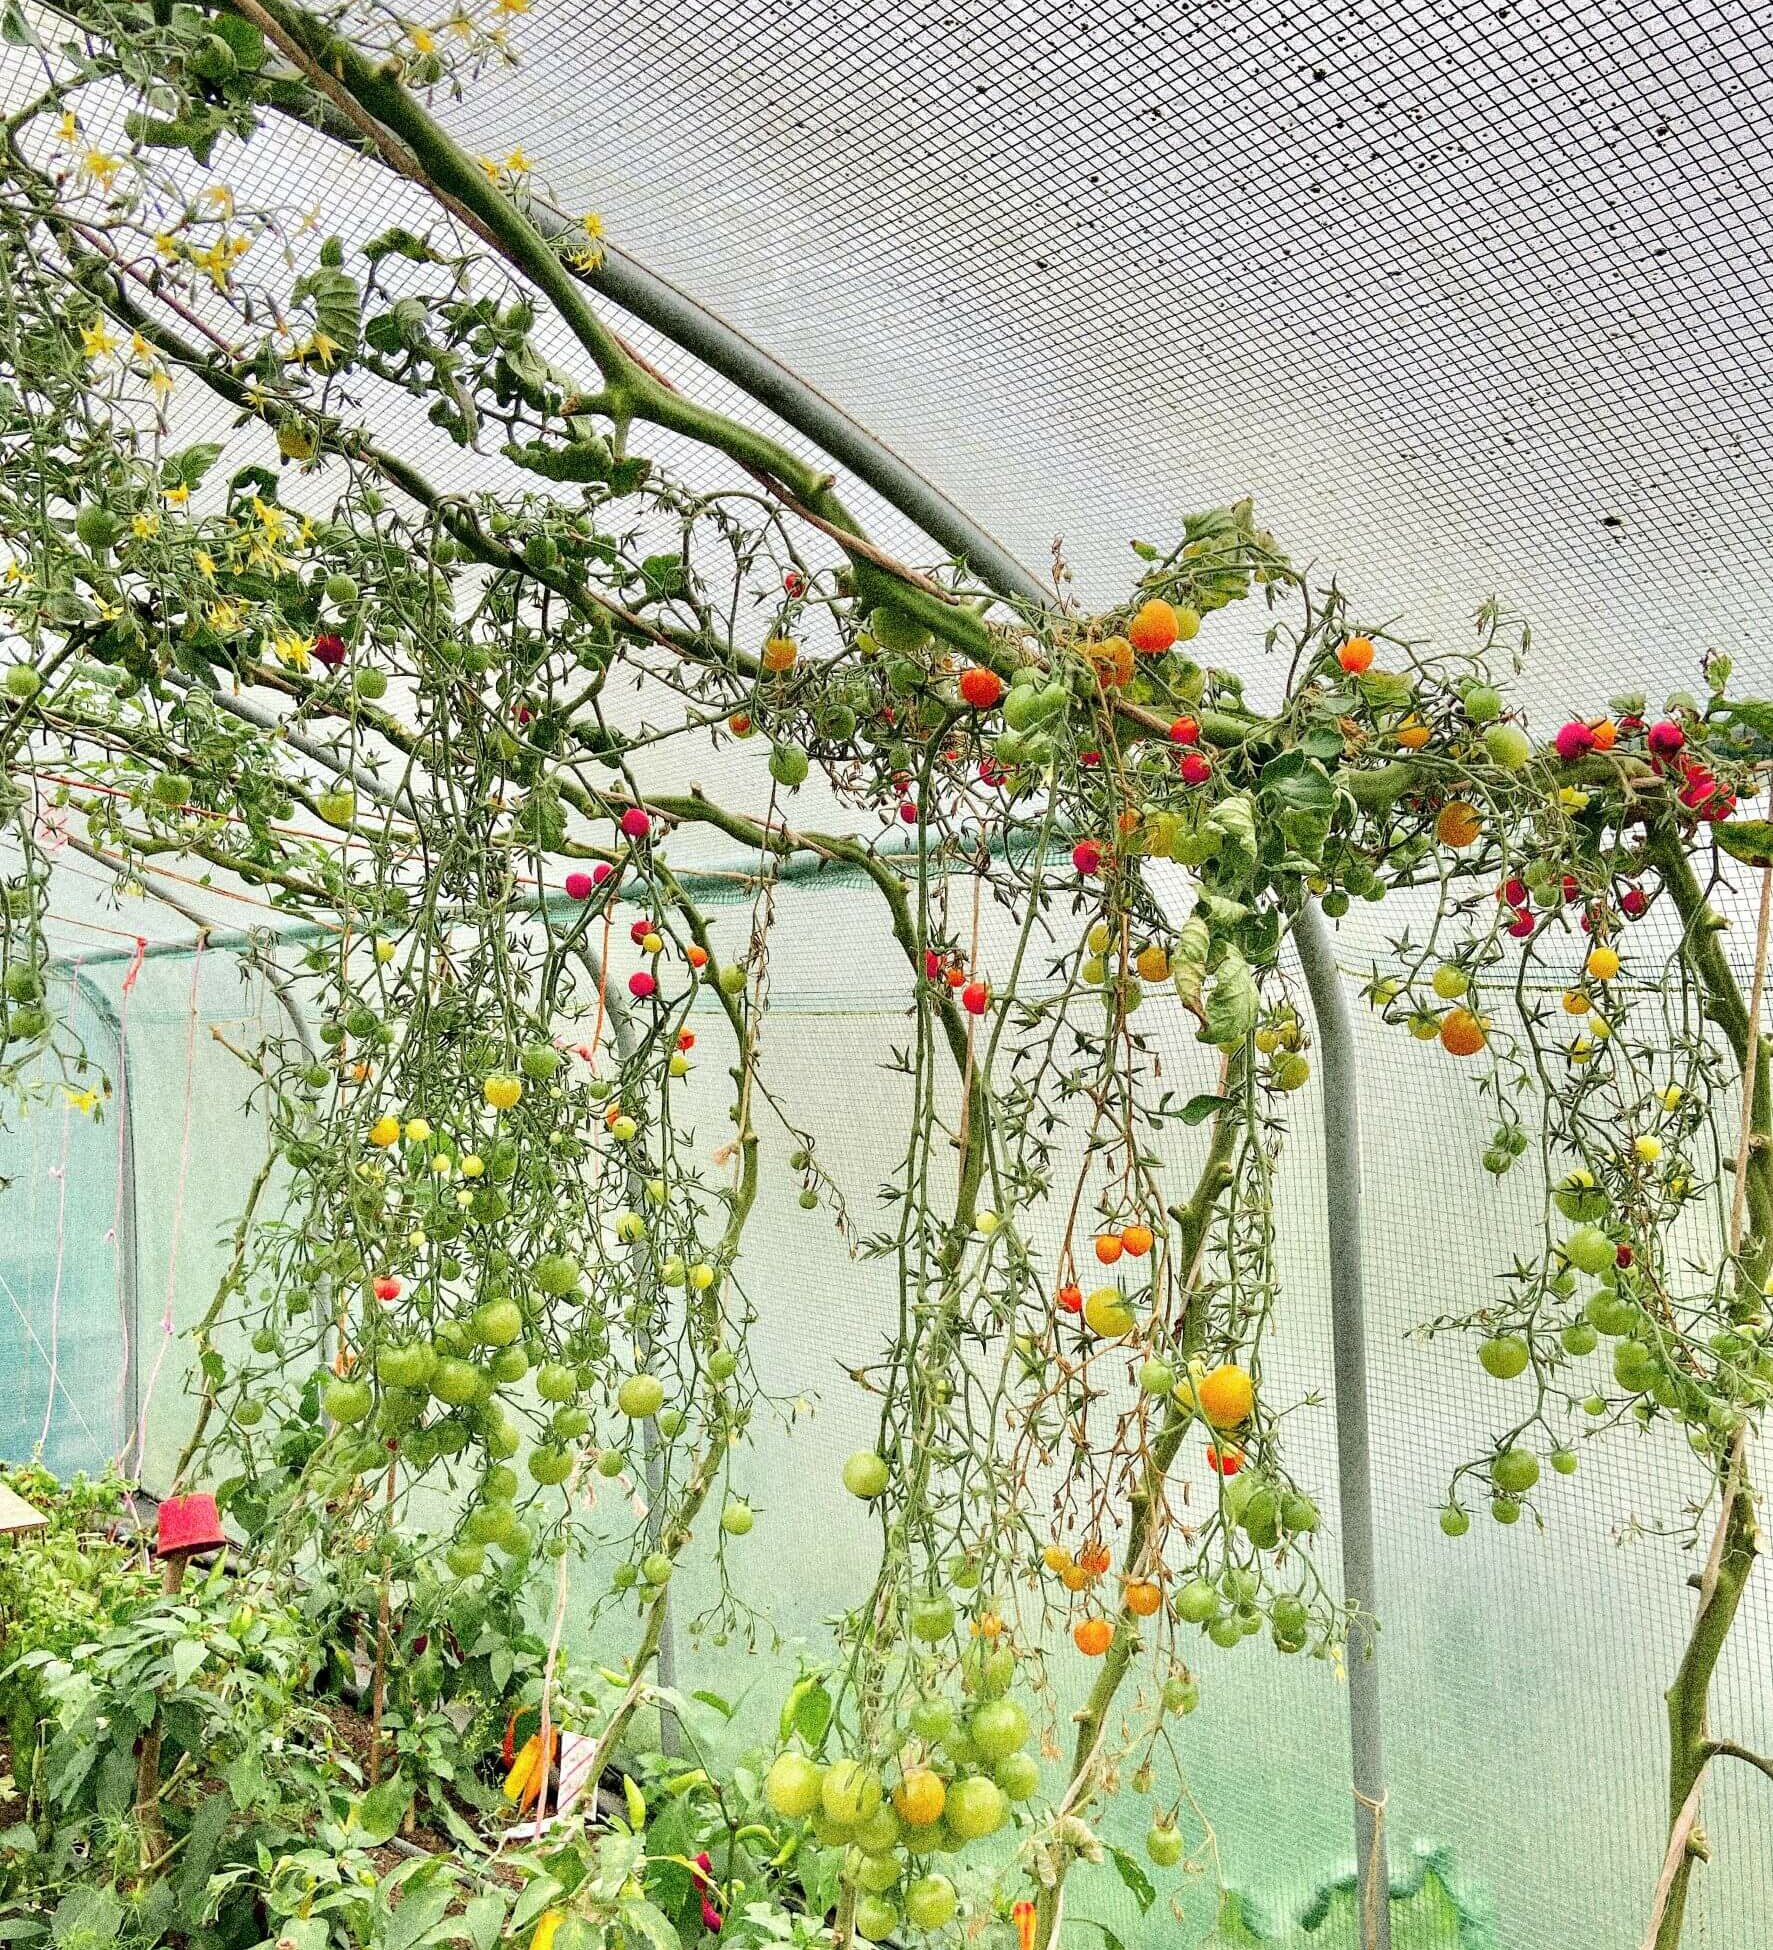 Tomatoes Growing on Vine at St Giles Estate